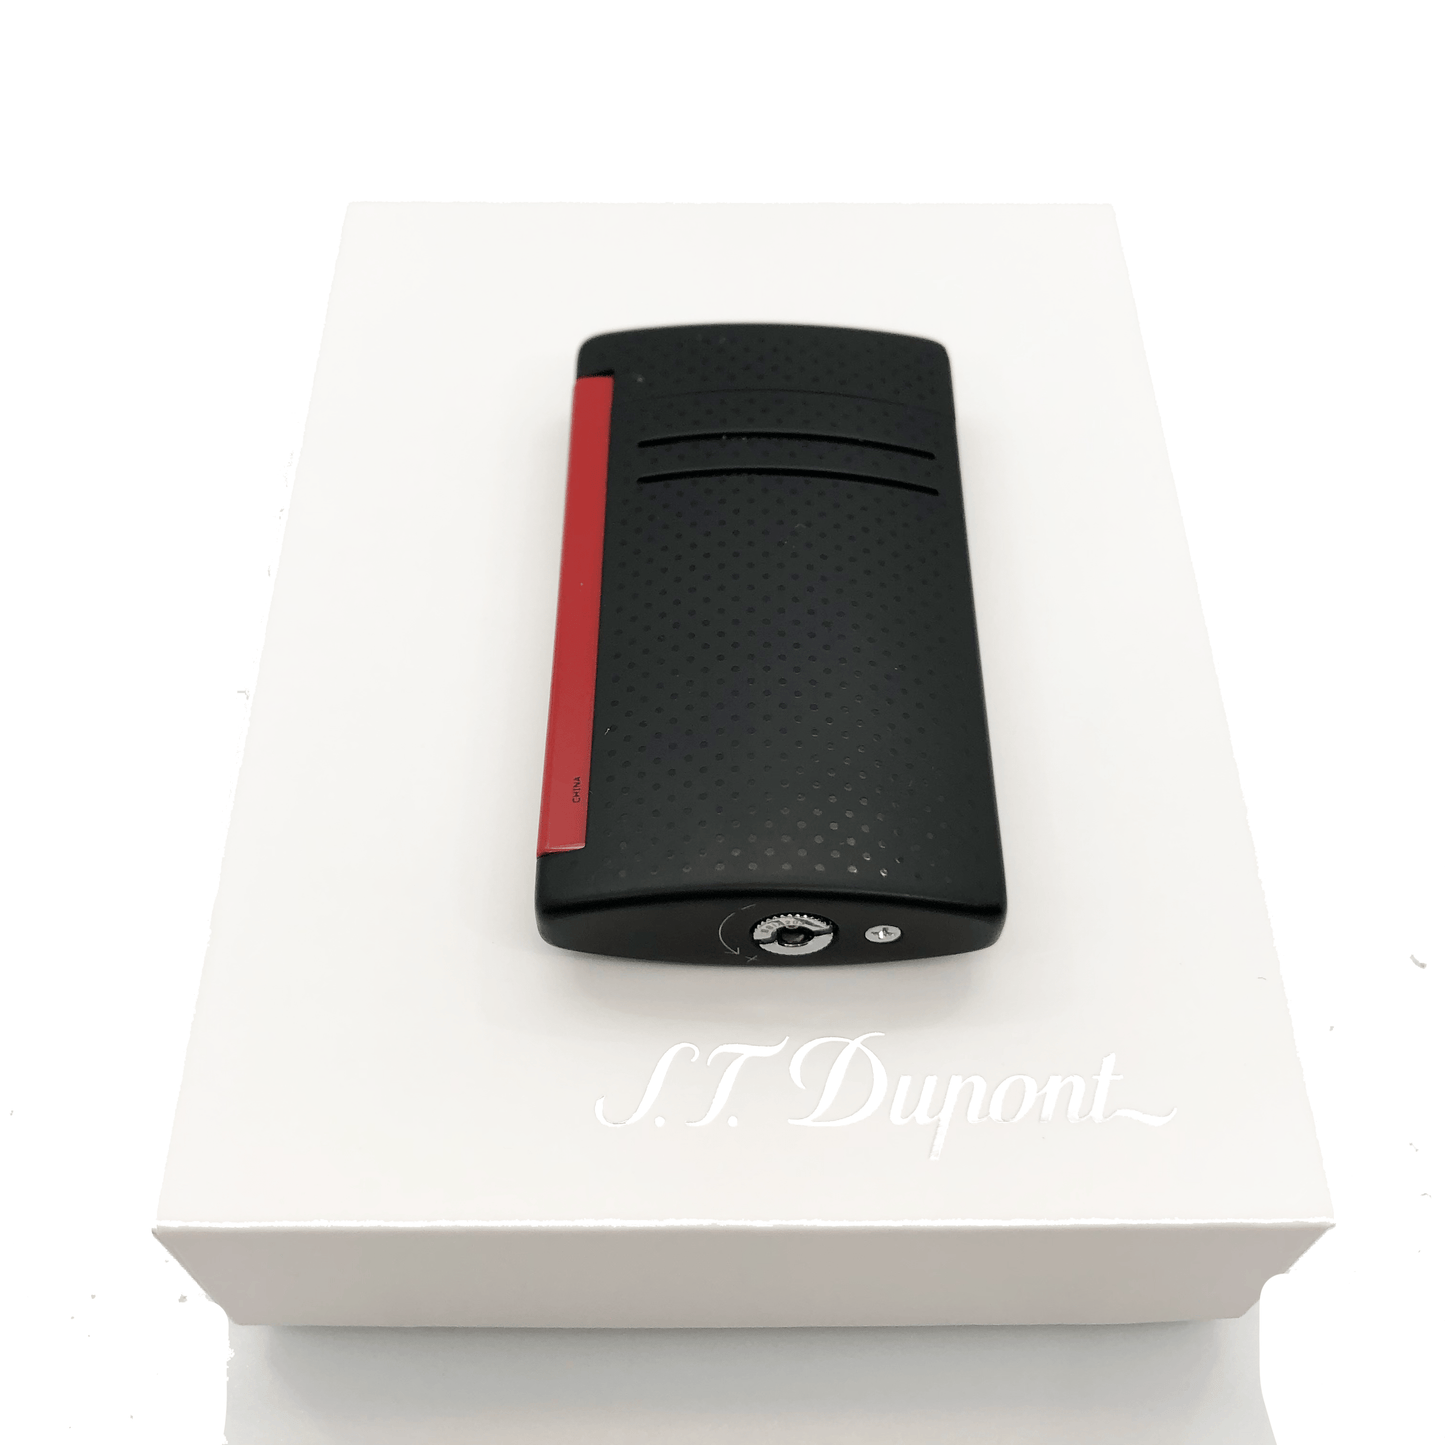 S.T Dupont- S.T Dupont Lighter MaxiJet Black with Red Finish w/Gas - OPS.com